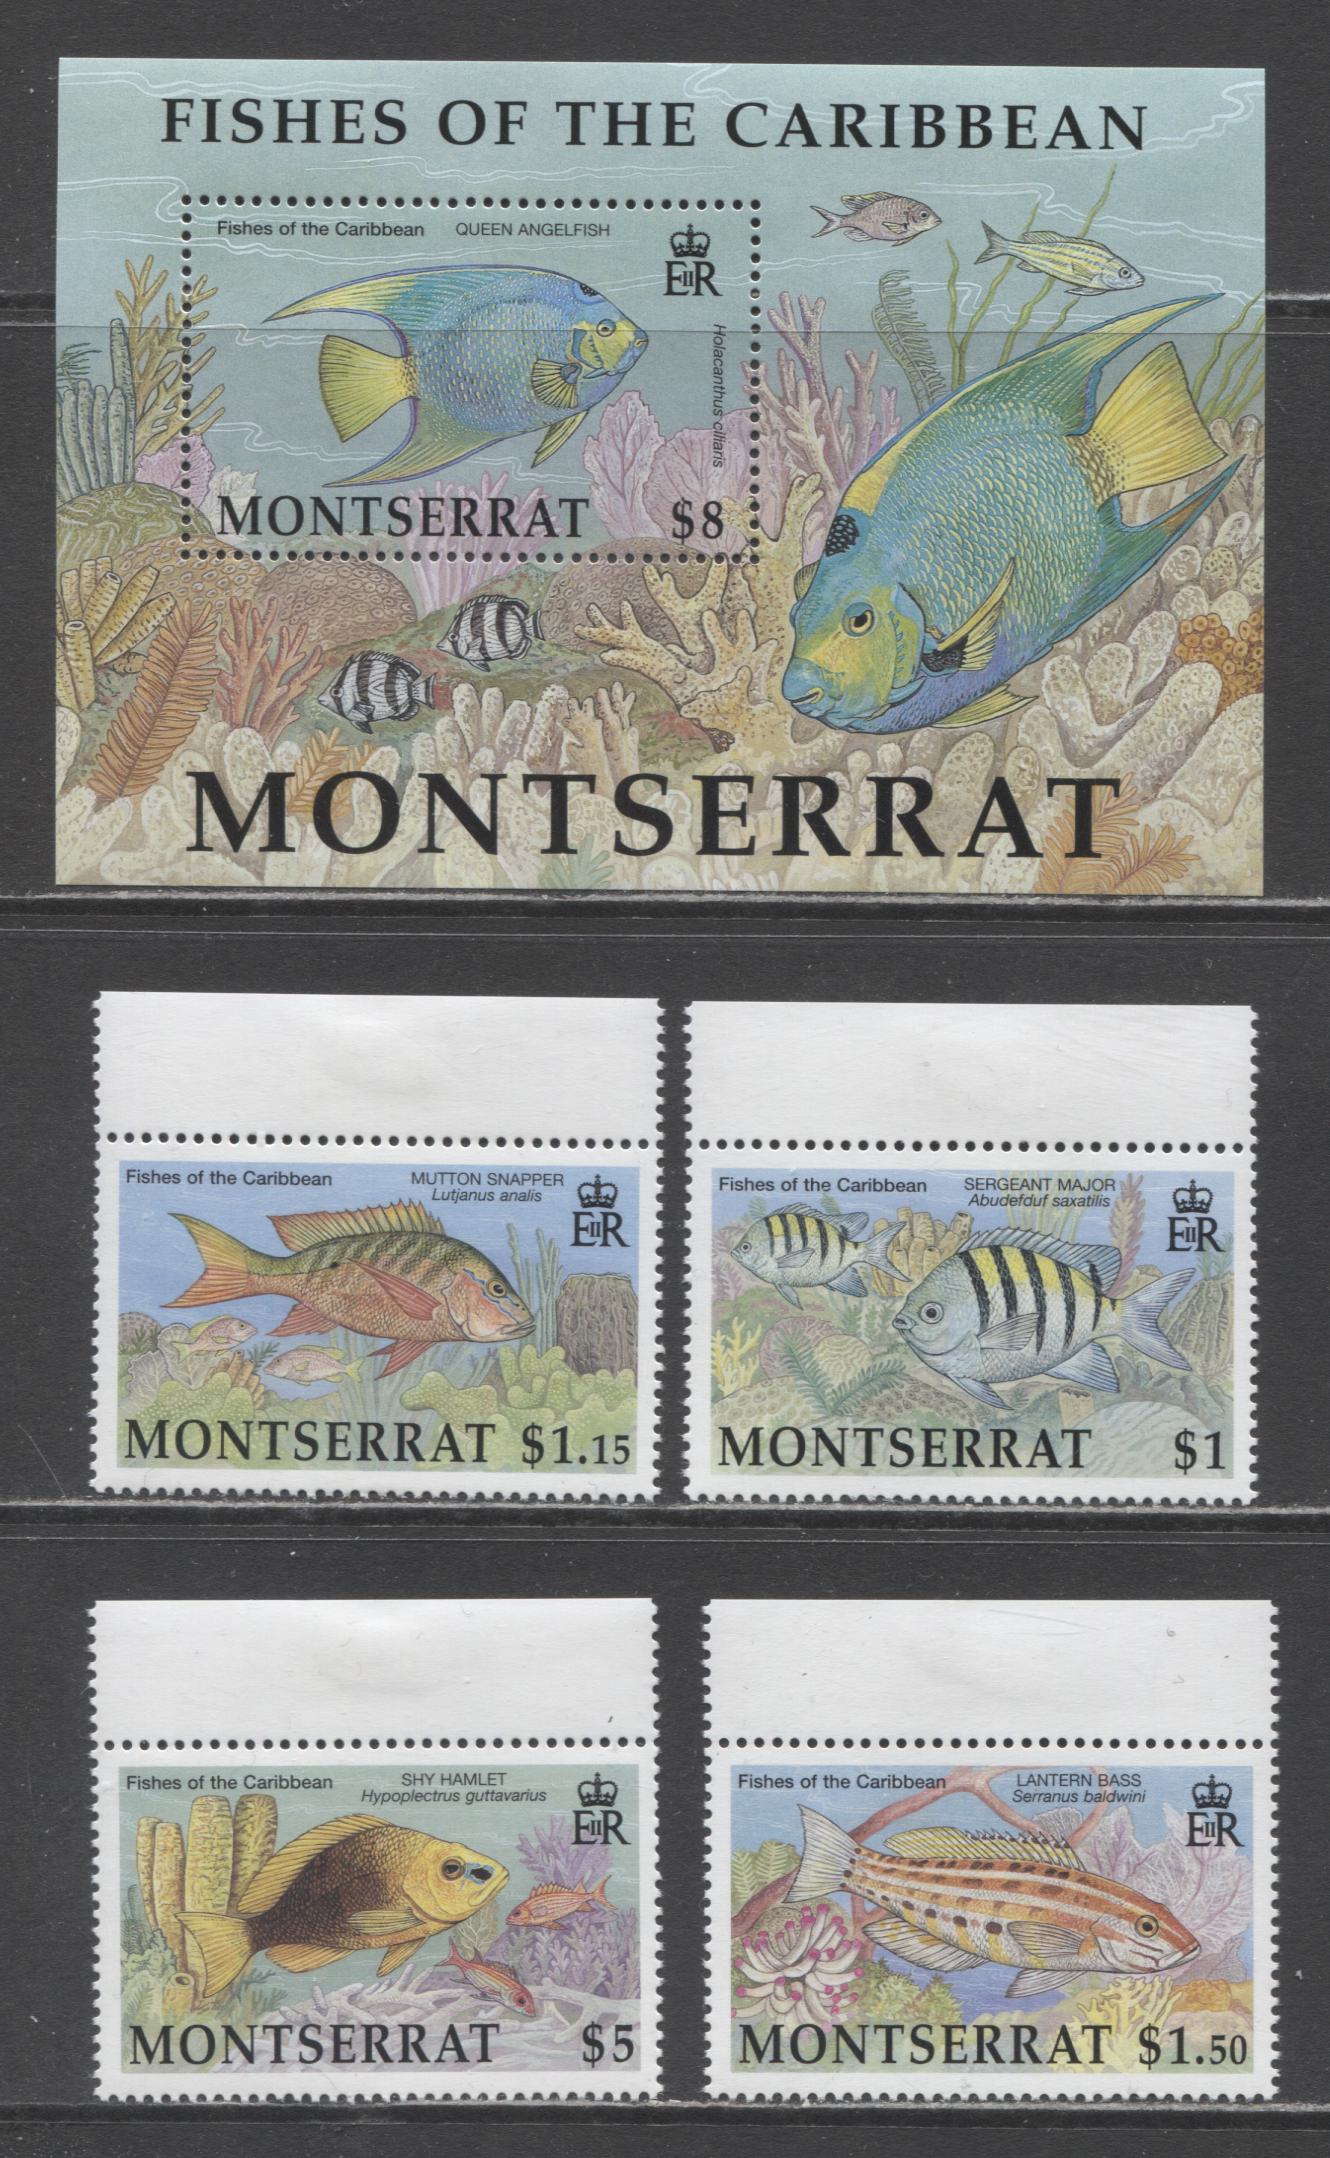 Lot 99 Montserrat SC#1063-1067 2002 Fish Issue, 4 VFOG & NH Singles & Souvenir, Click on Listing to See ALL Pictures, 2017 Scott Cat. $22